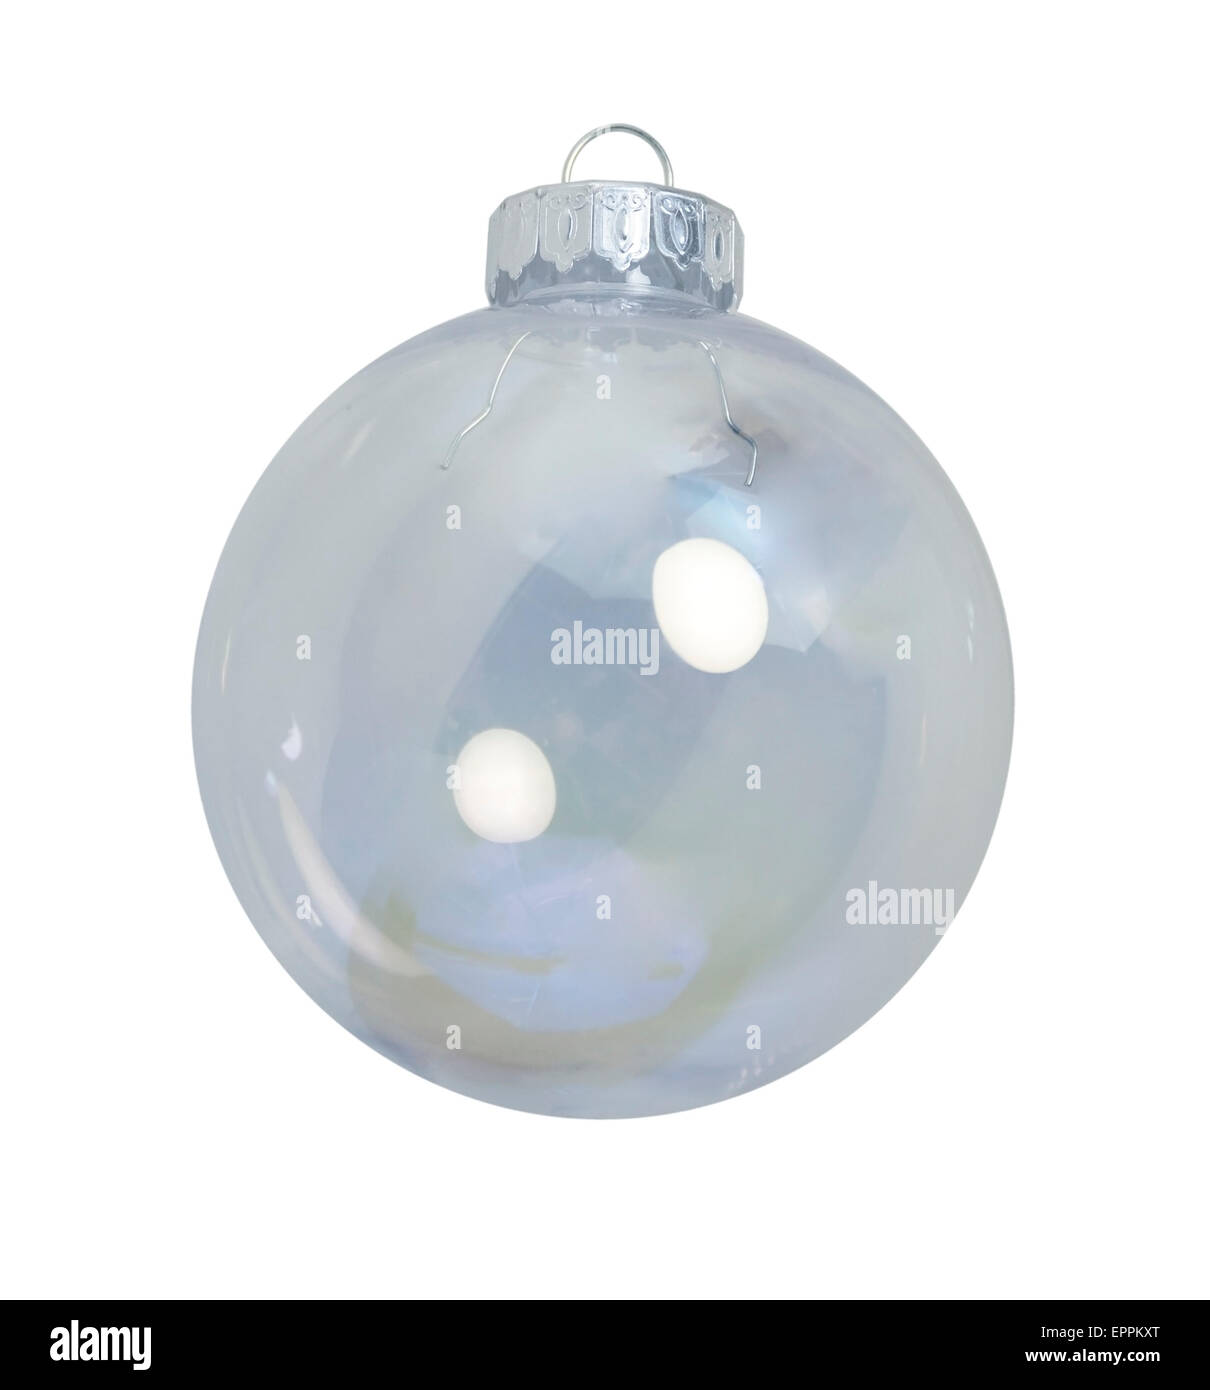 Round Christmas ornament for decorating during the winter season - path included Stock Photo